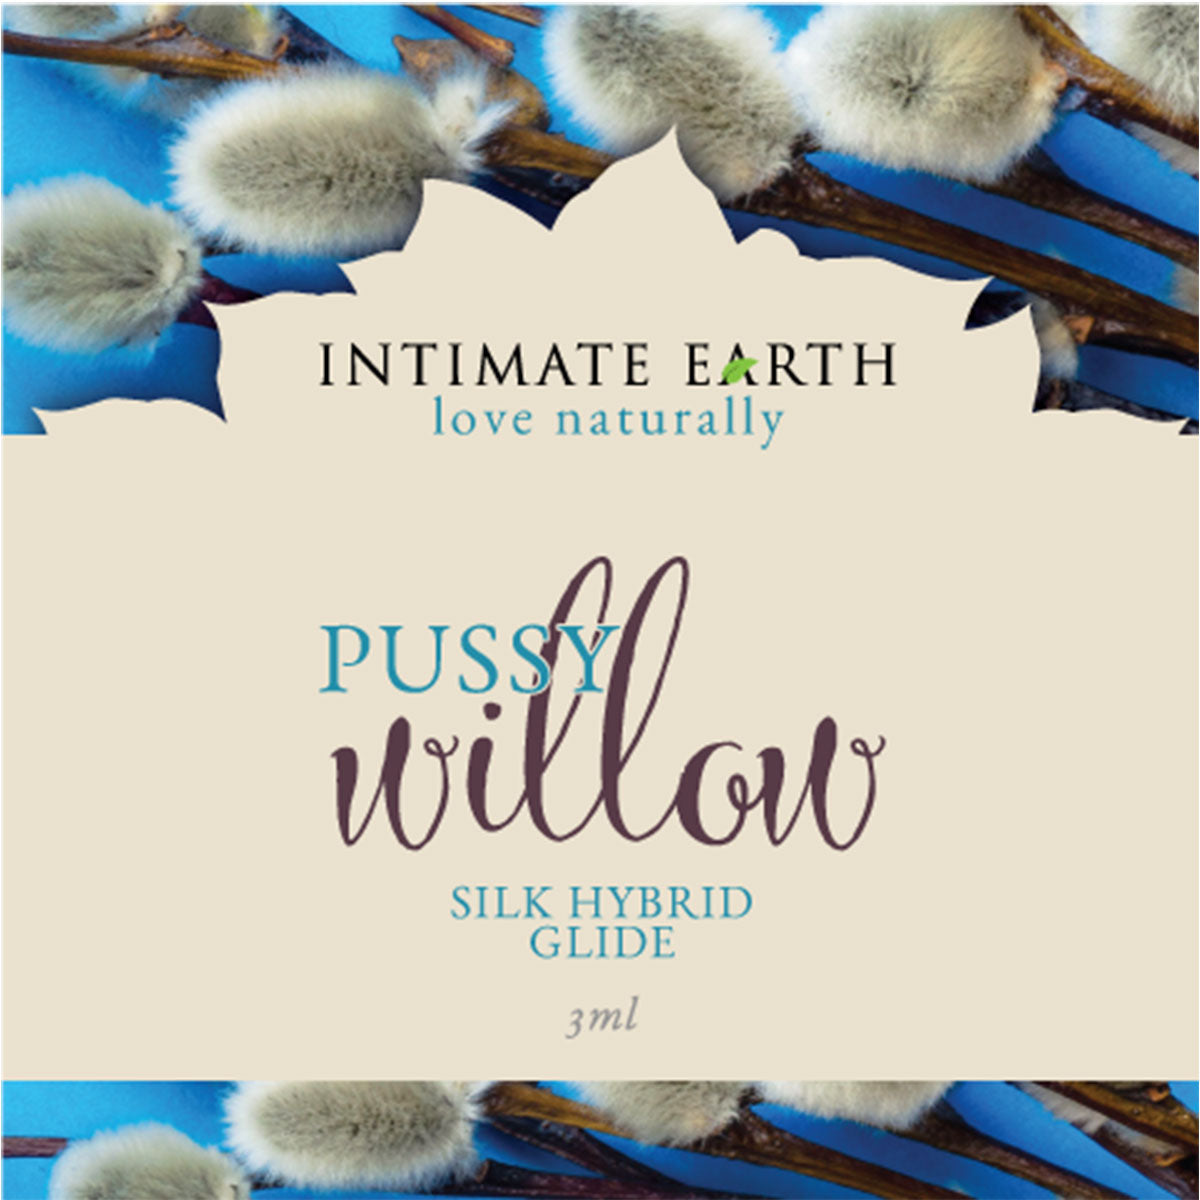 Intimate Earth Pussy Willow Silk Hybrid Glide- Assorted Sizes